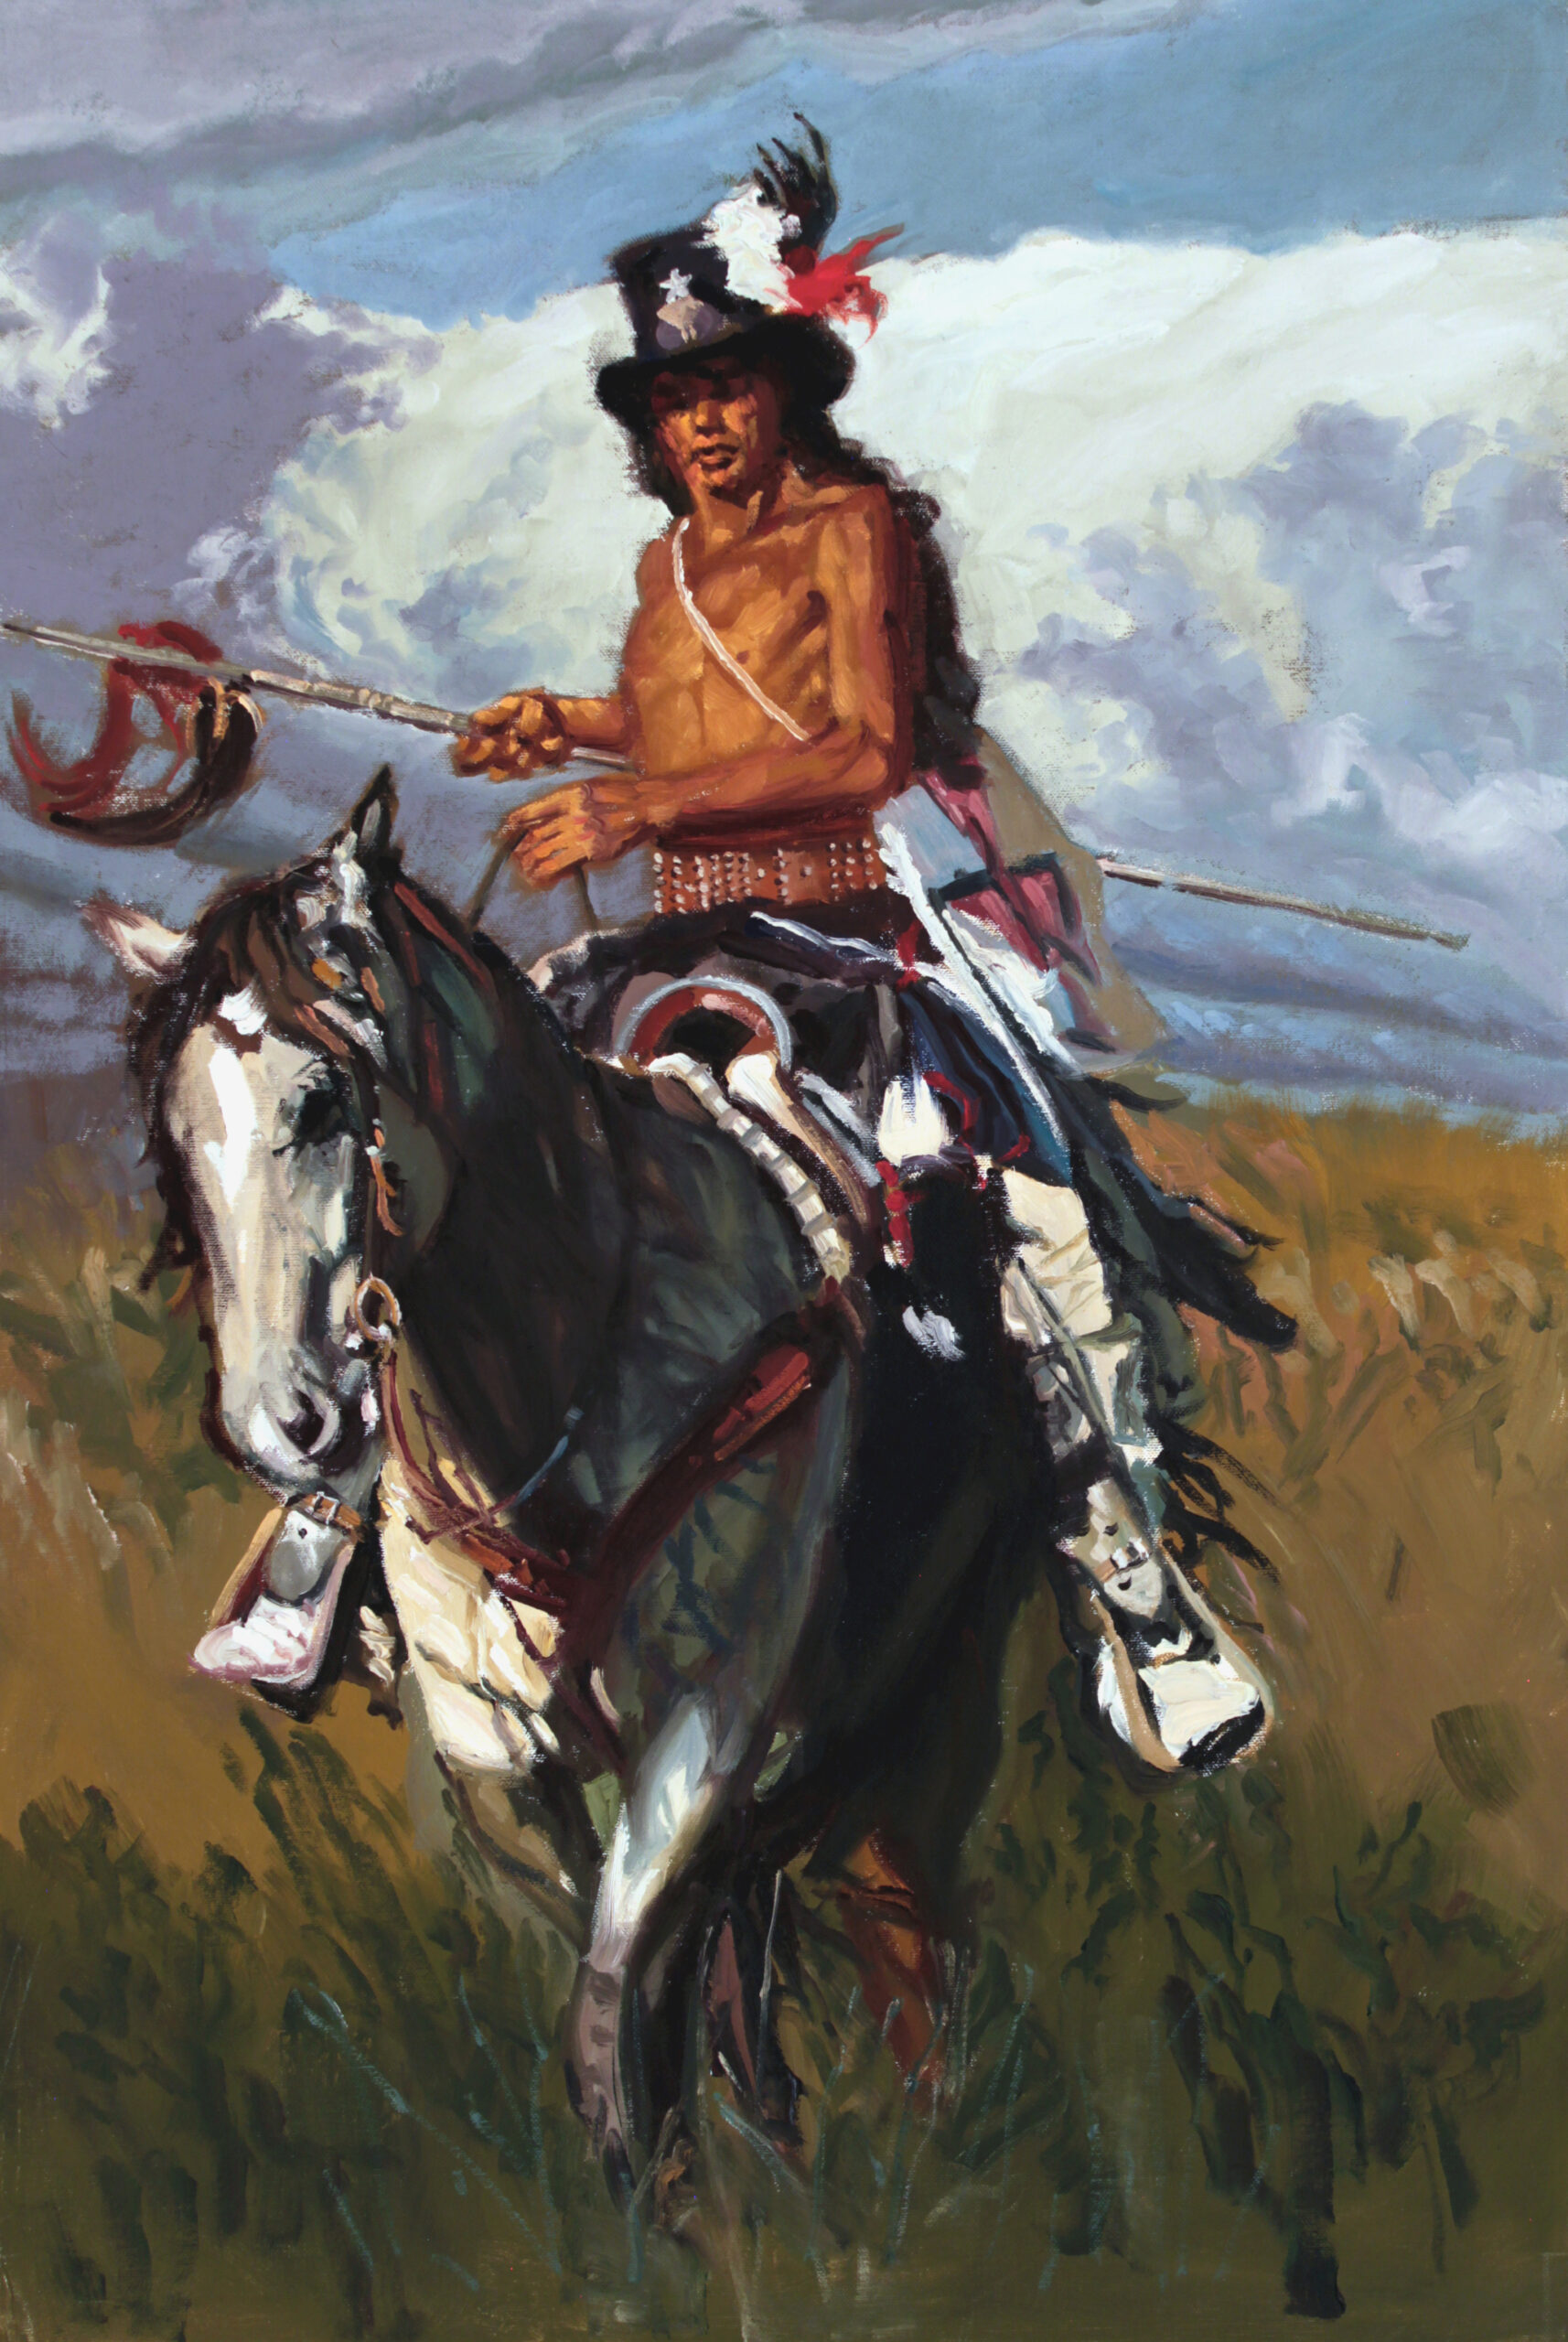 painting of.a native american wearing a tophat and riding a horse